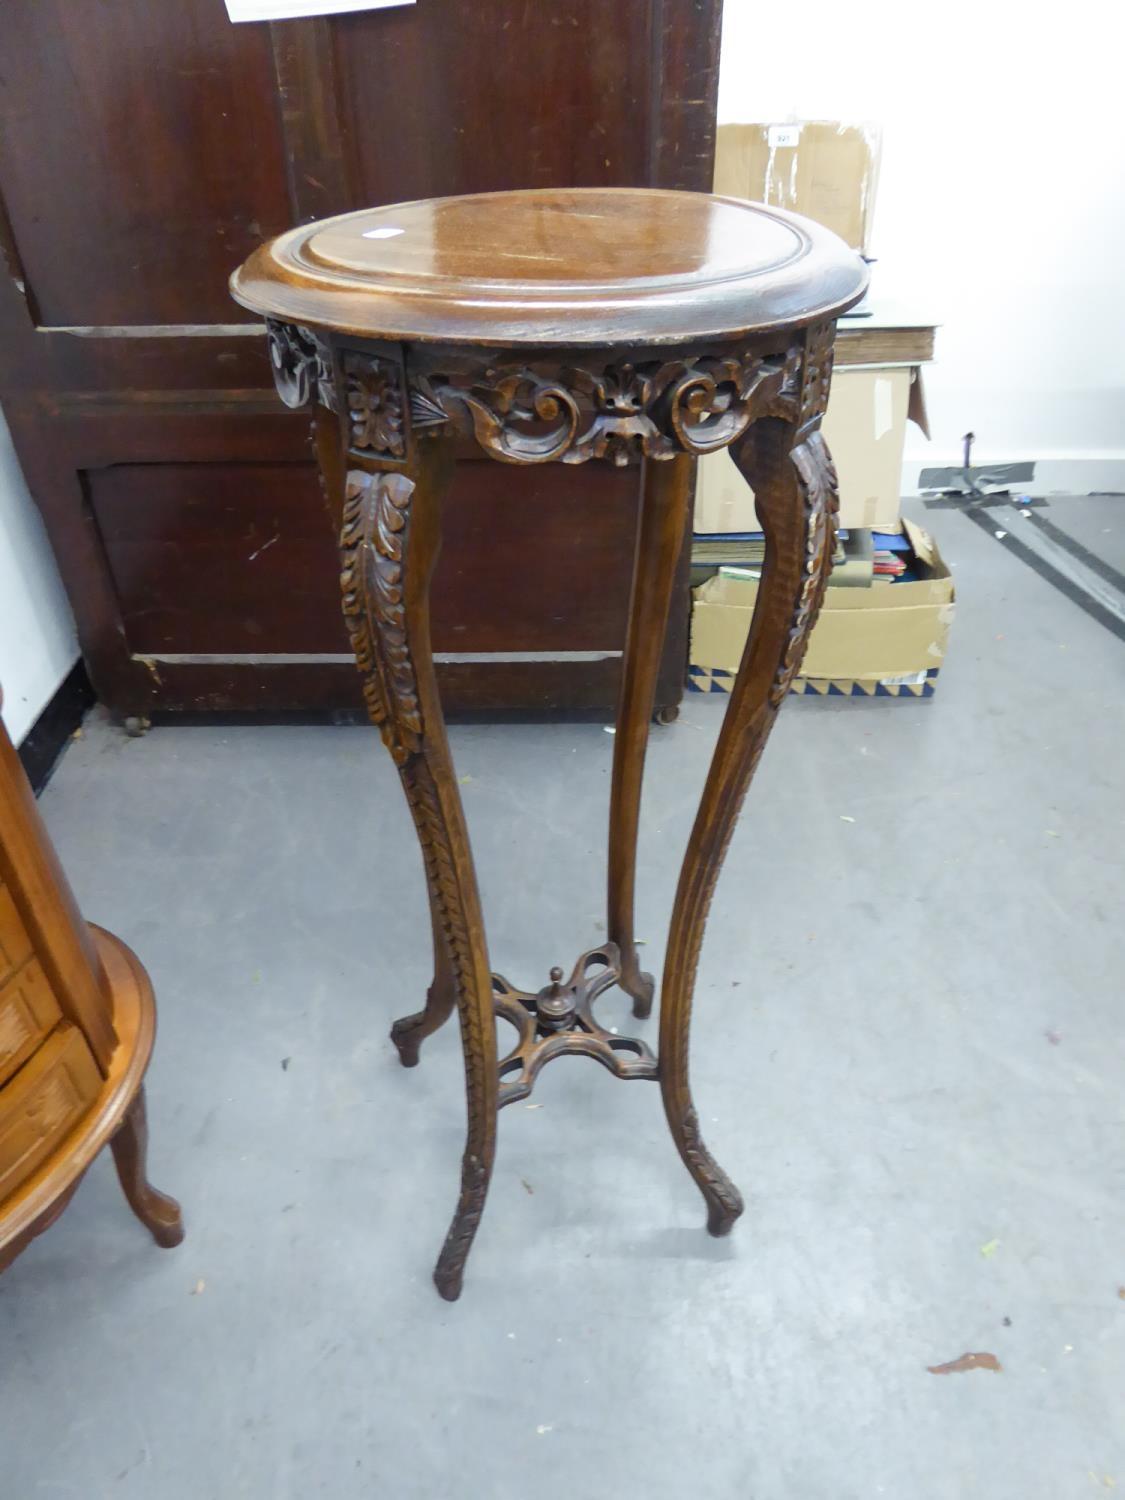 PROFUSELY CARVED OAK JARDINIERE STAND, WITH CIRCULAR TOP ON FOUR SLENDER LEGS